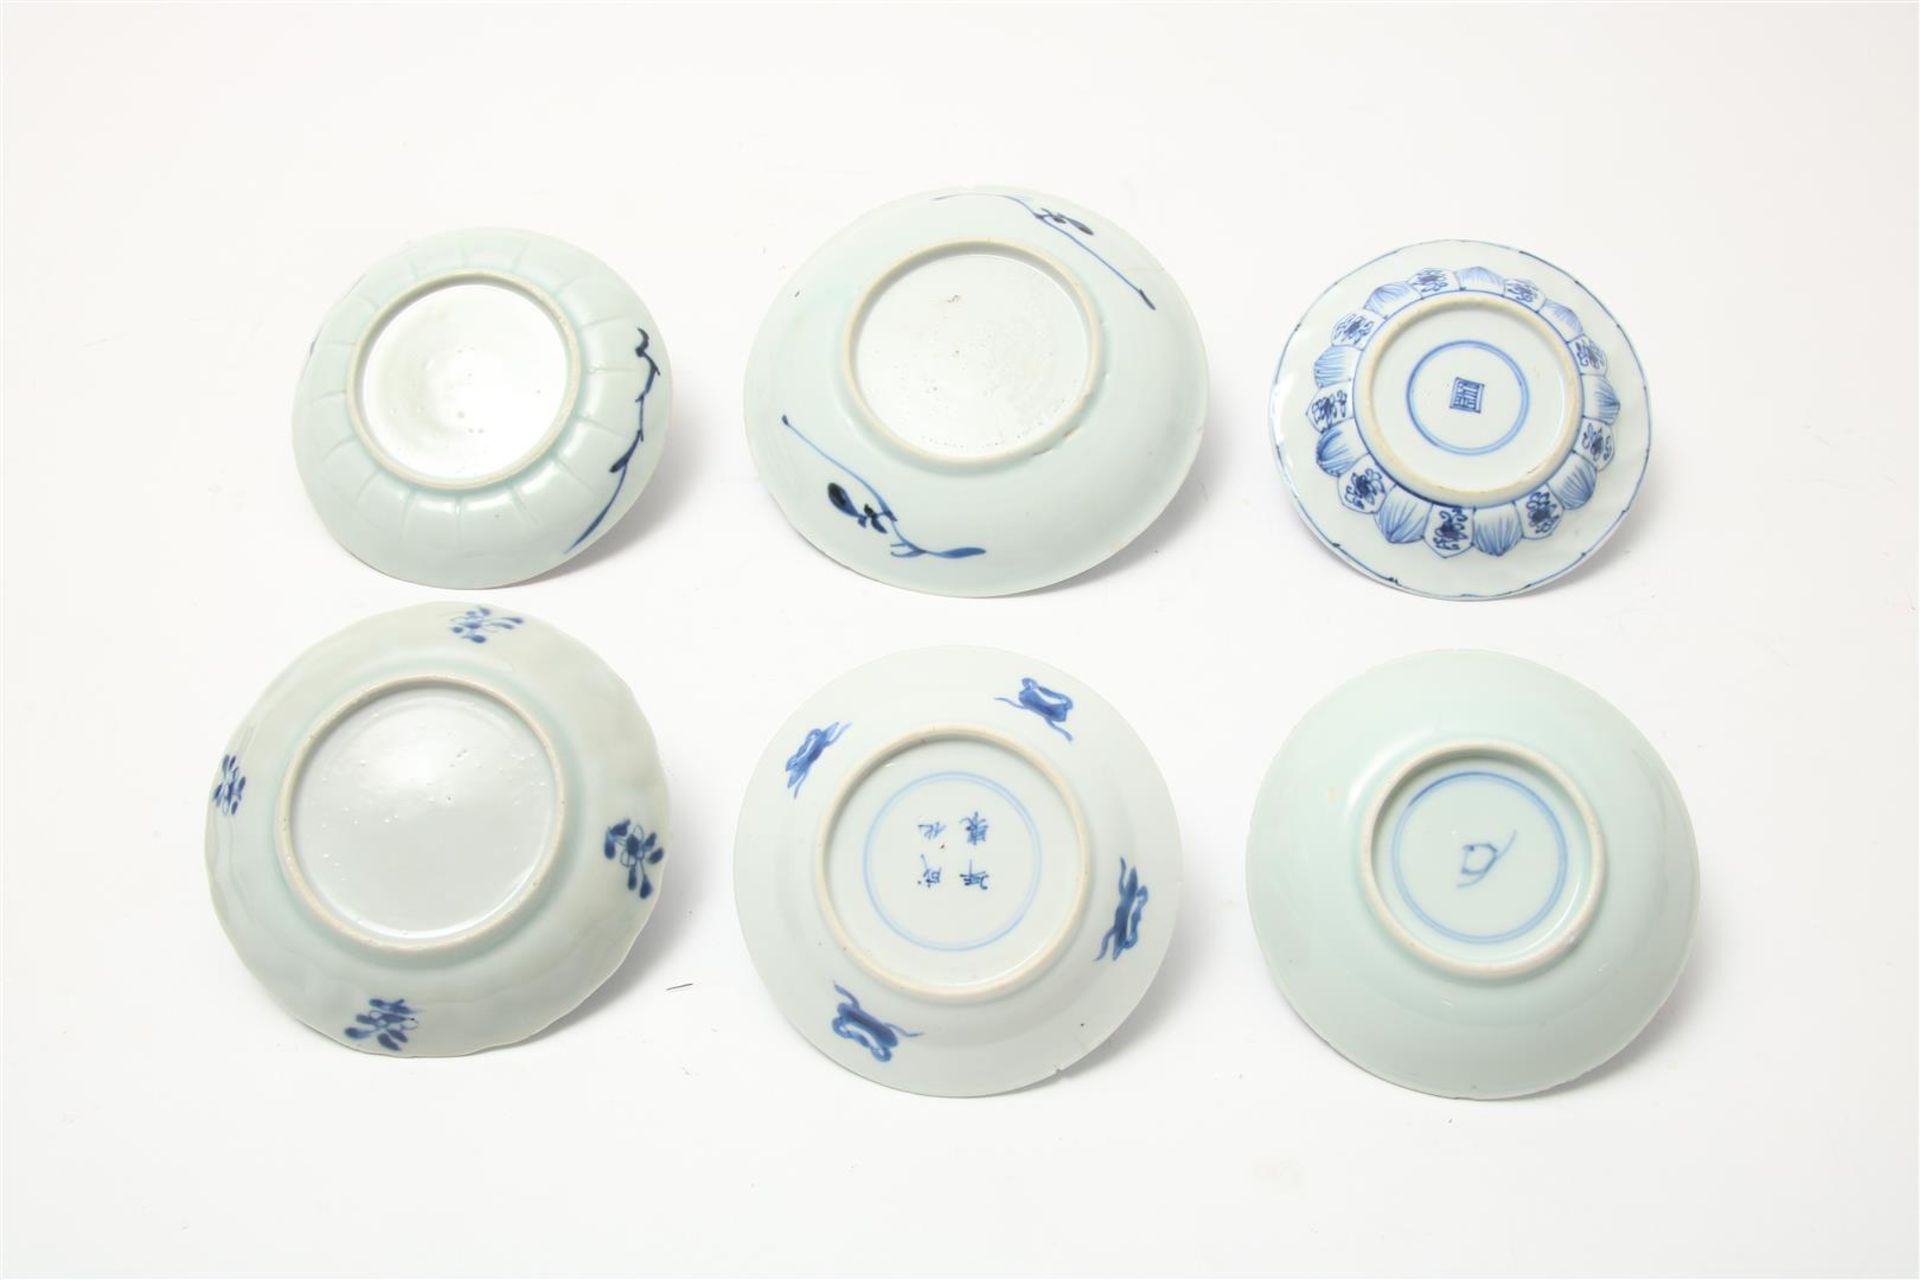 Lot of various porcelain, China, 18th/19th century, saucer with figures in a garden, various cups - Image 3 of 4